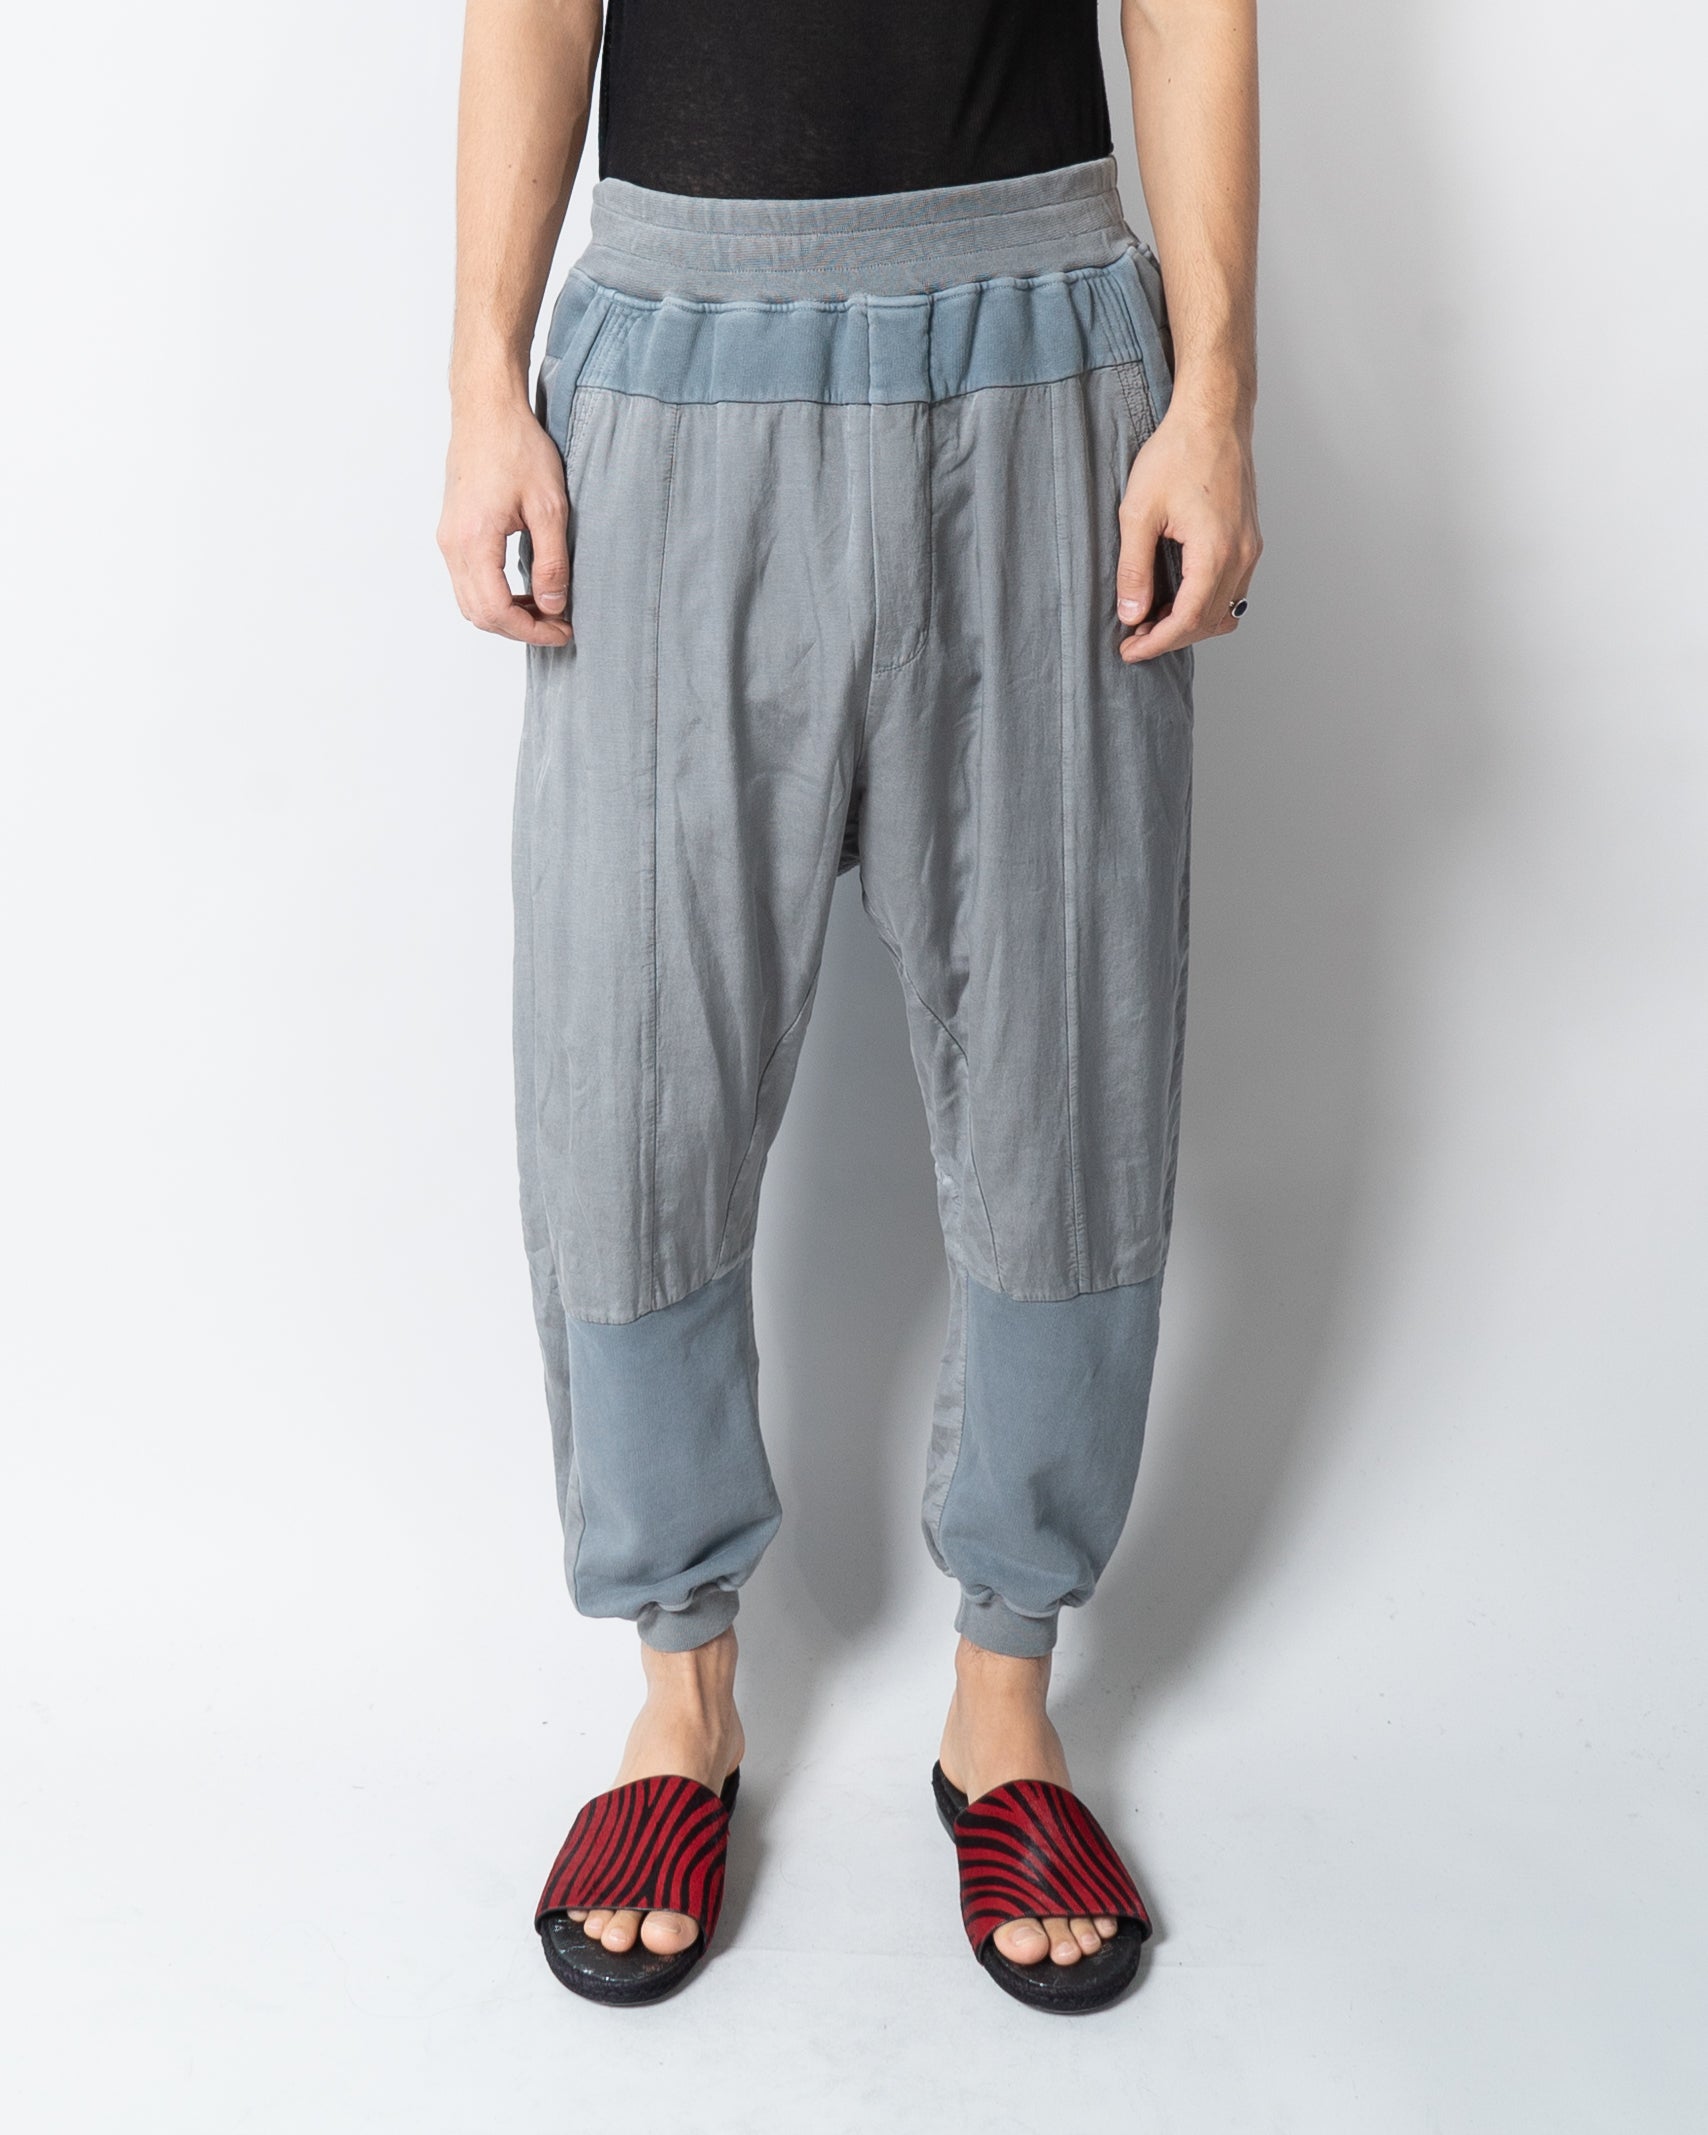 SS14 Panelled Perth Jogger